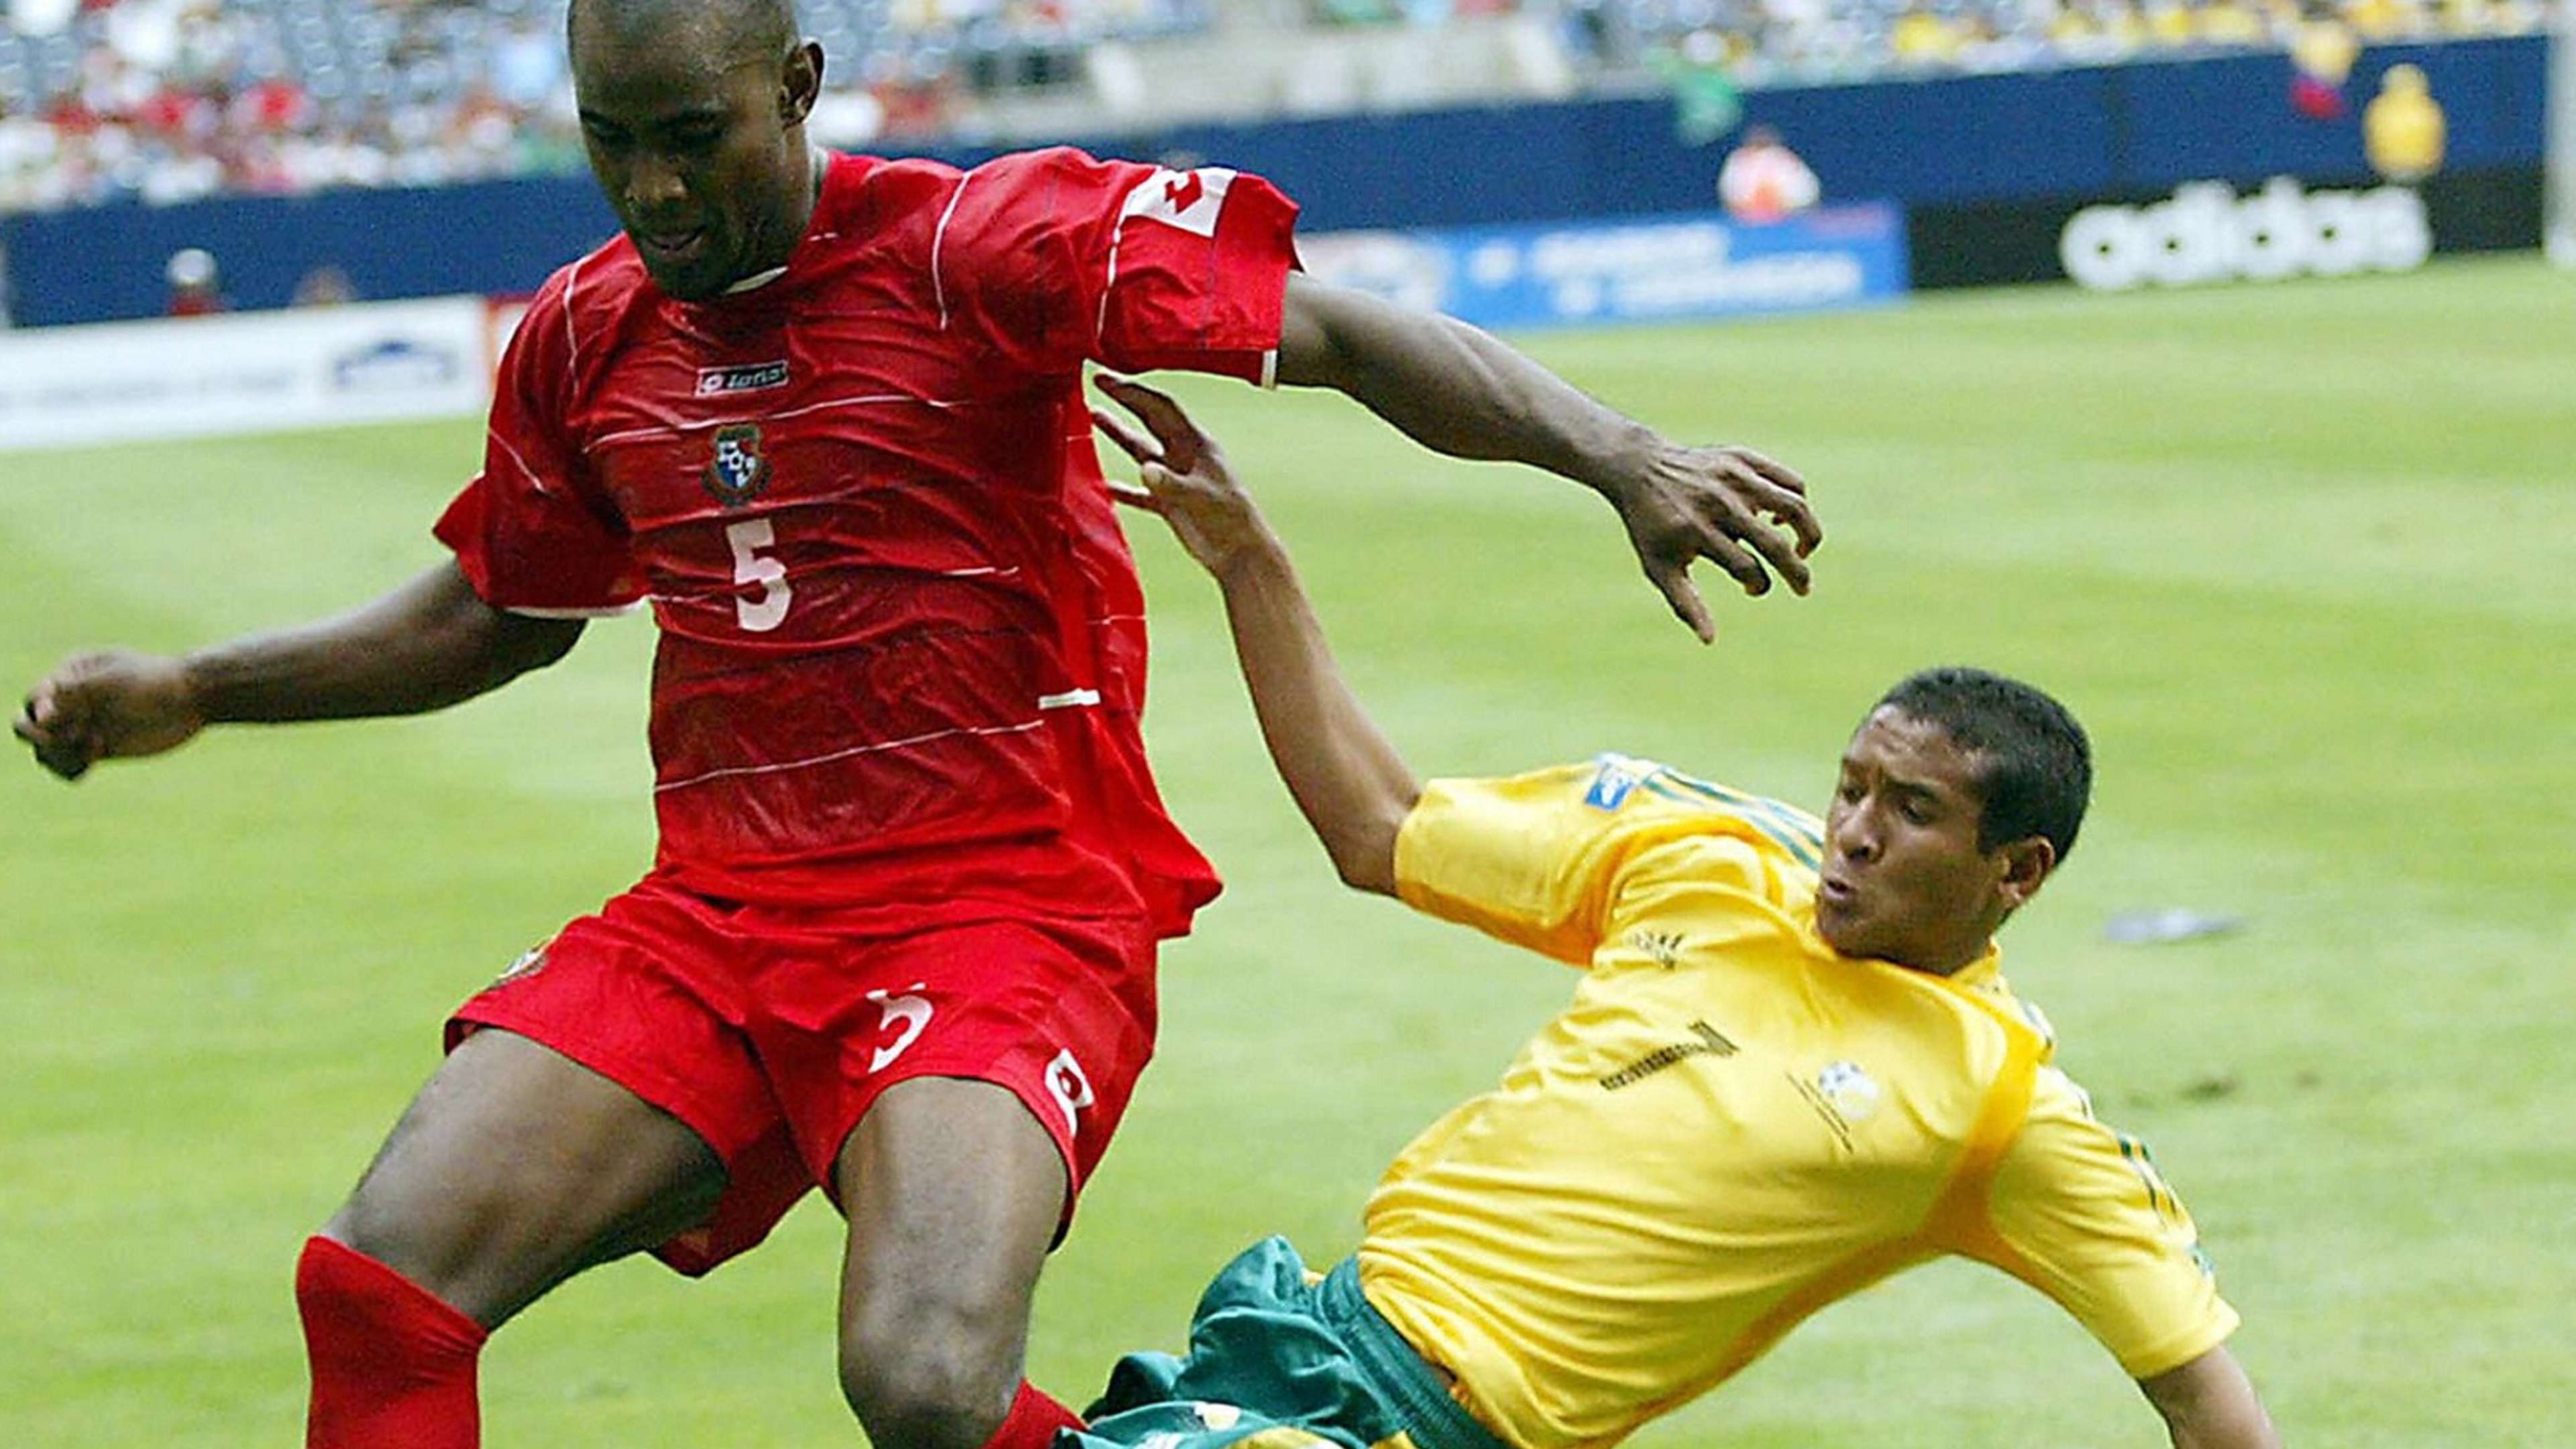 Panama's Felipe Baloy and South Africa's Daine Klate vies during the quarterfinals of the 2005 Concacaf Gold Cup soccer match at Reliant Stadium in Houston, Texas 17 July 2005